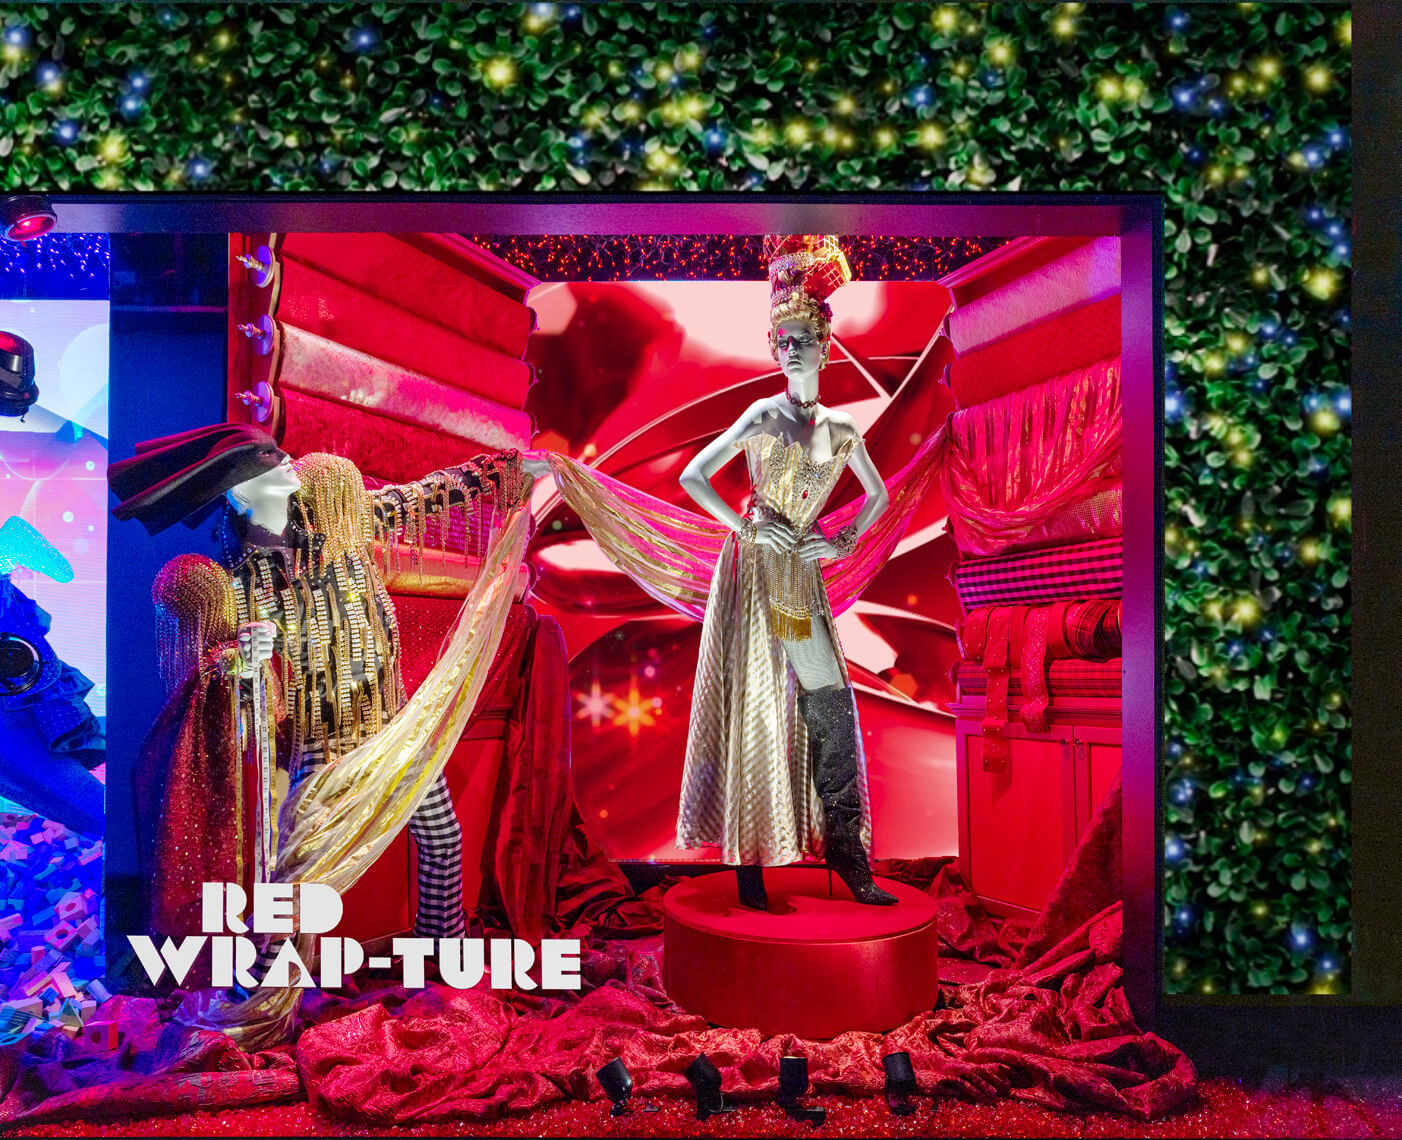 Louis Vuitton & Lego collab holiday window appears at Bloomingdales in NYC.  : r/lego